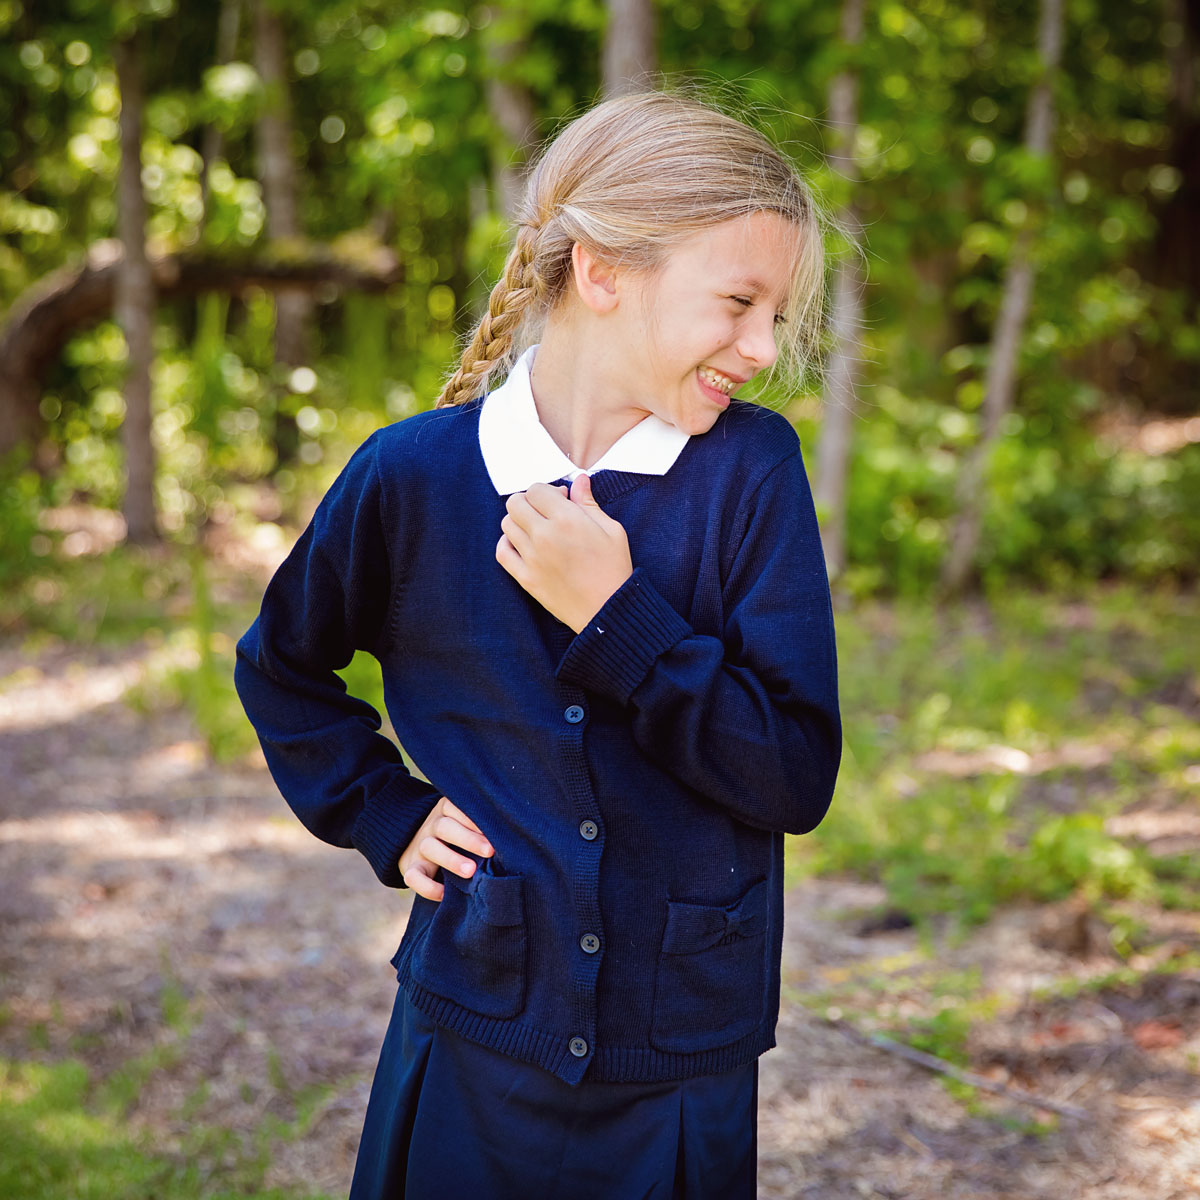 Homeschooling Or Not: 21 Back To School Outfits For All The Kids